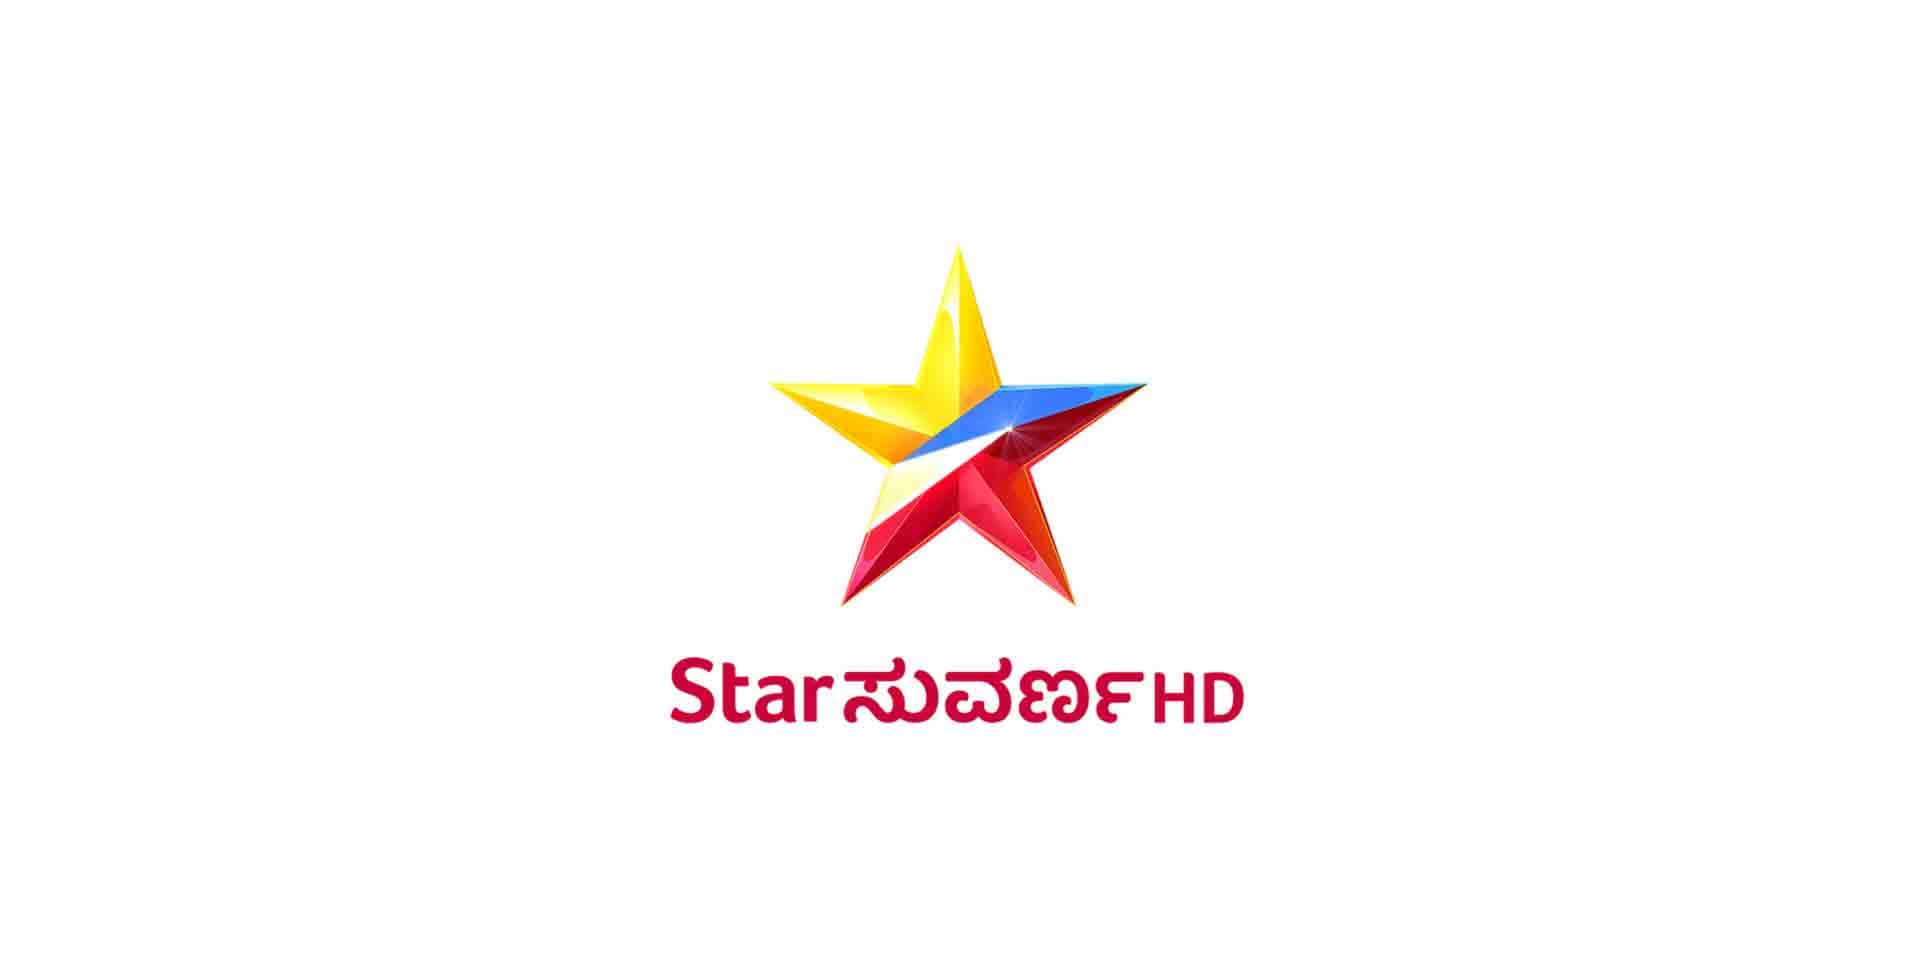 safari channel number in asianet